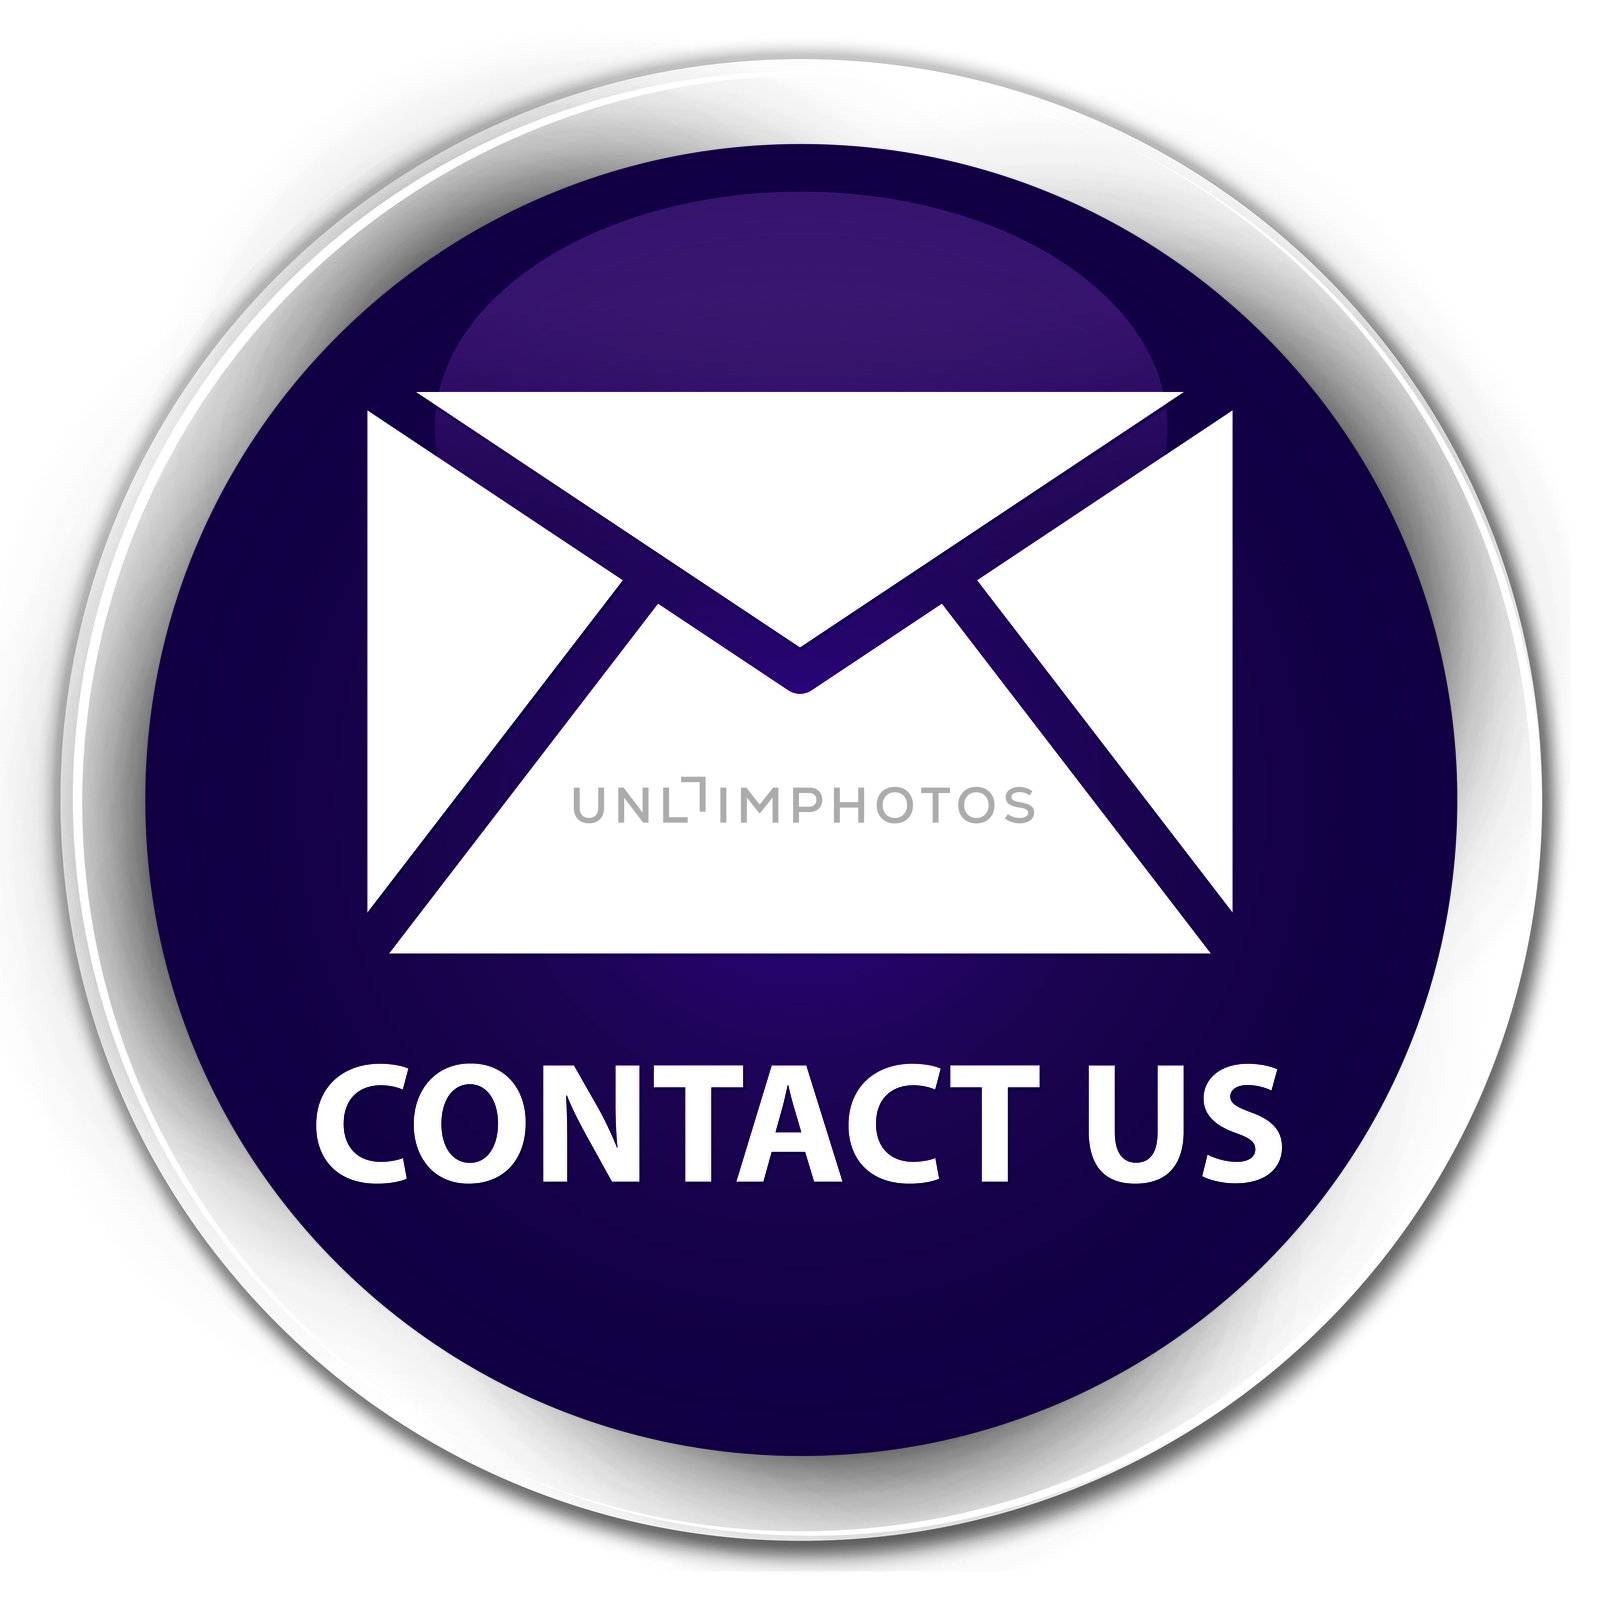 Contact us (email icon) glossy purple round button